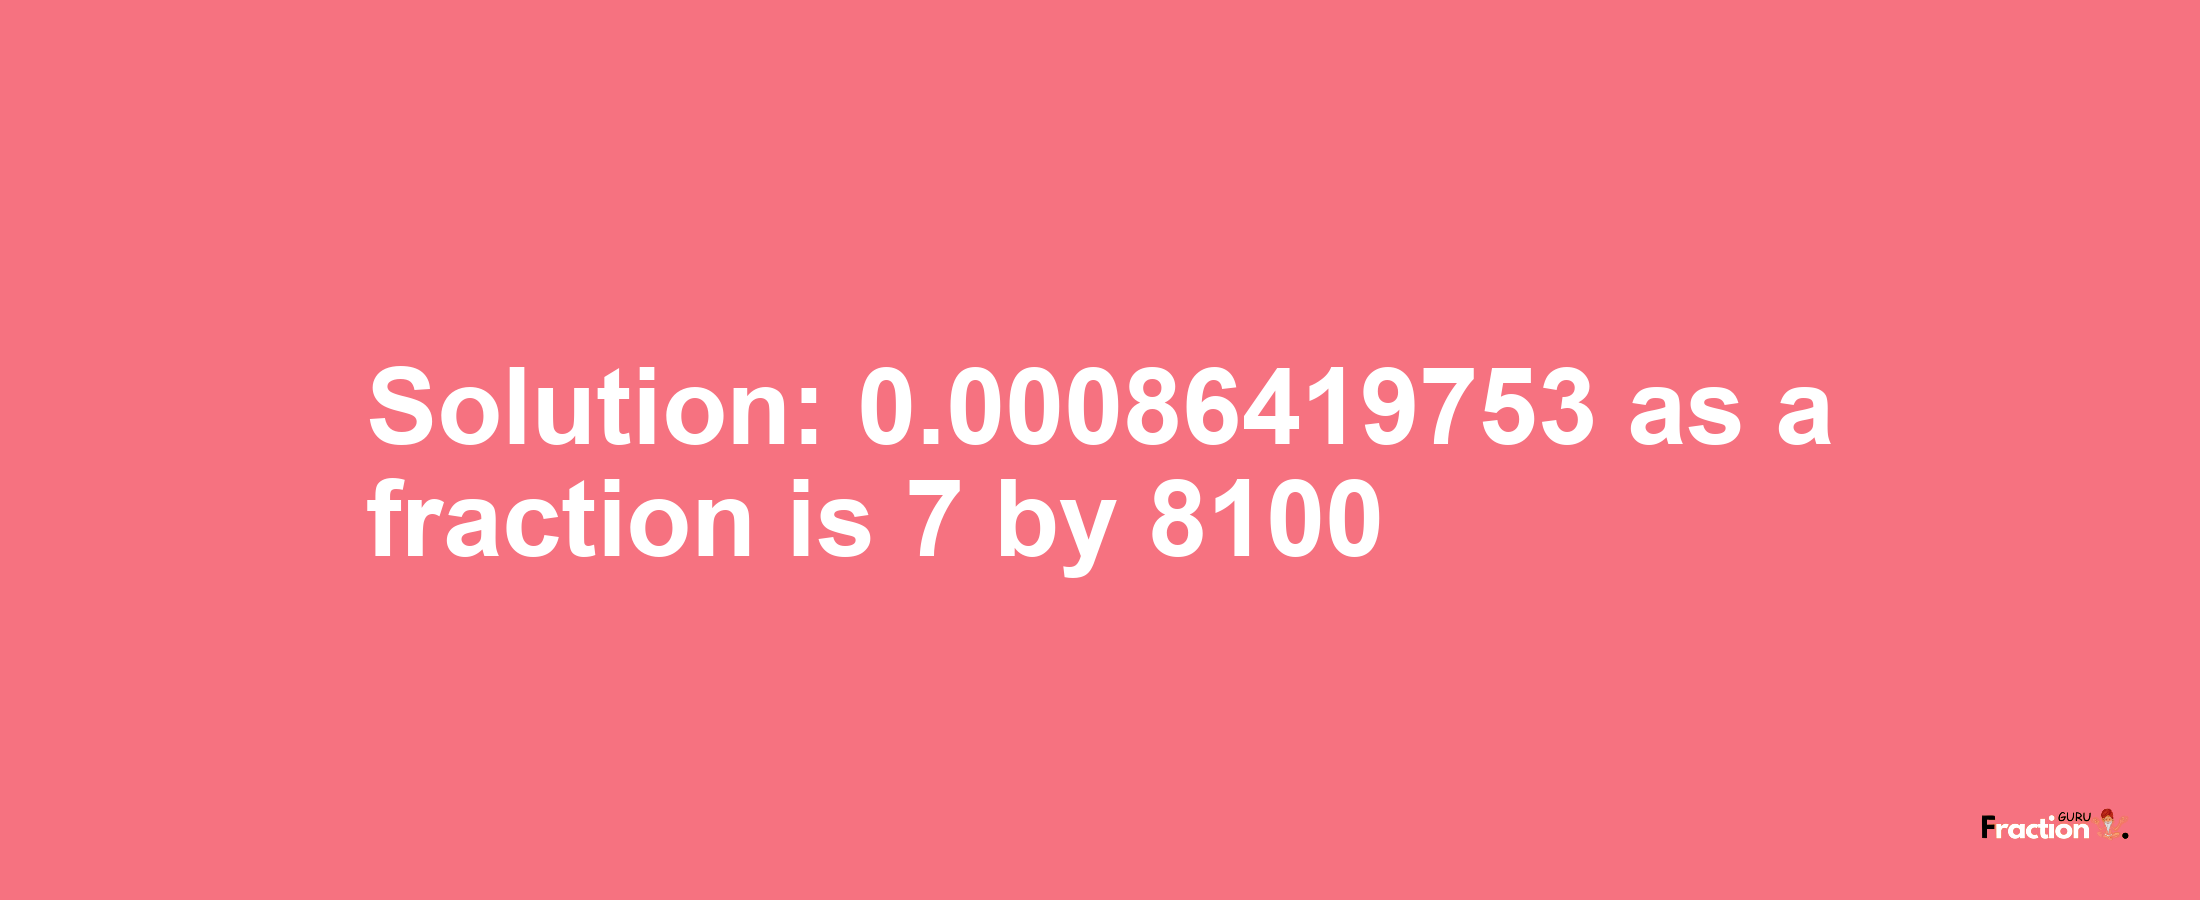 Solution:0.00086419753 as a fraction is 7/8100